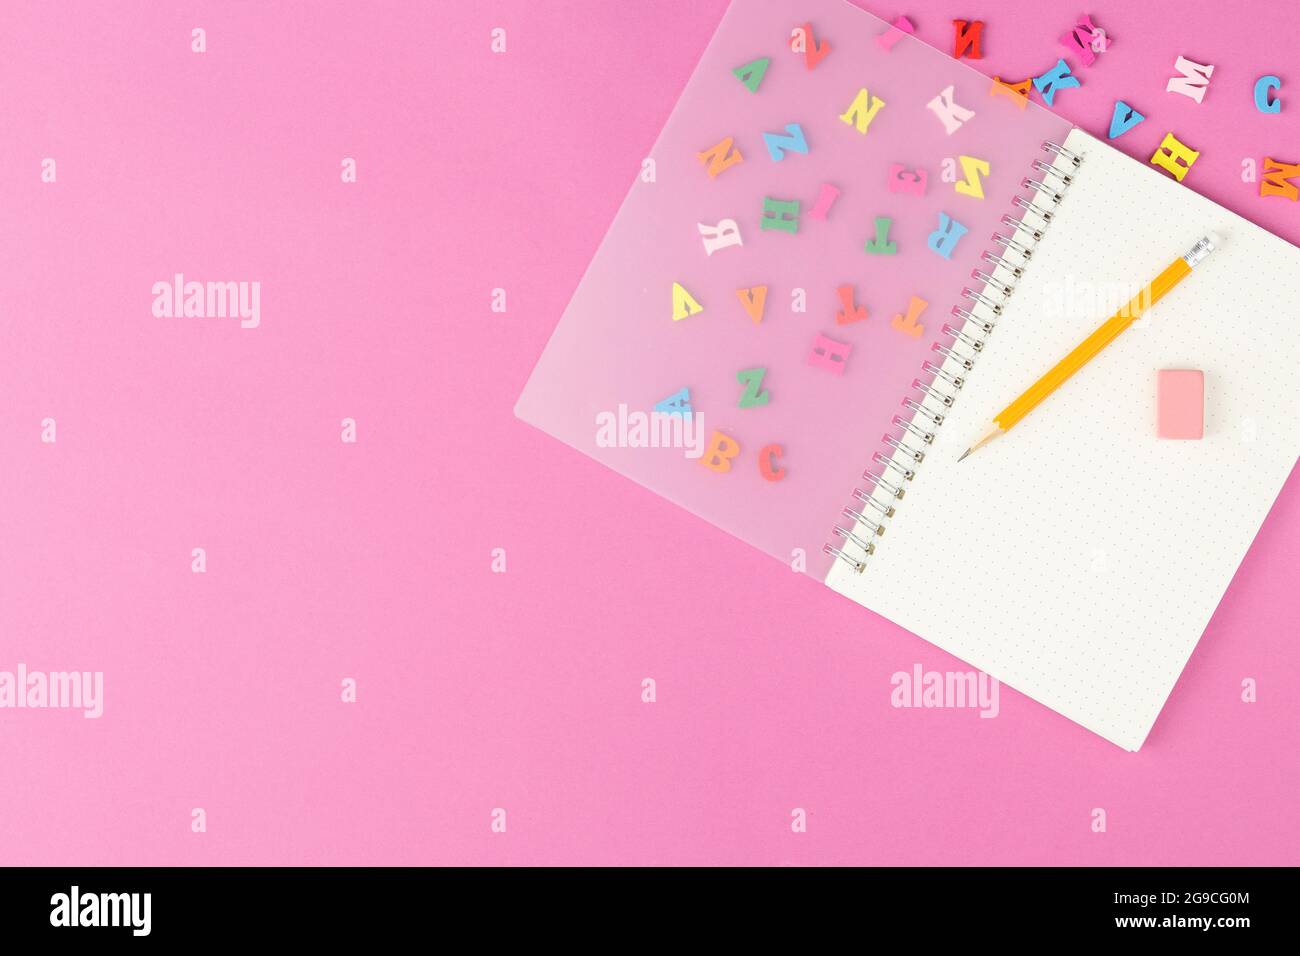 Spiral notepad with stationery on the desk. Stock Photo